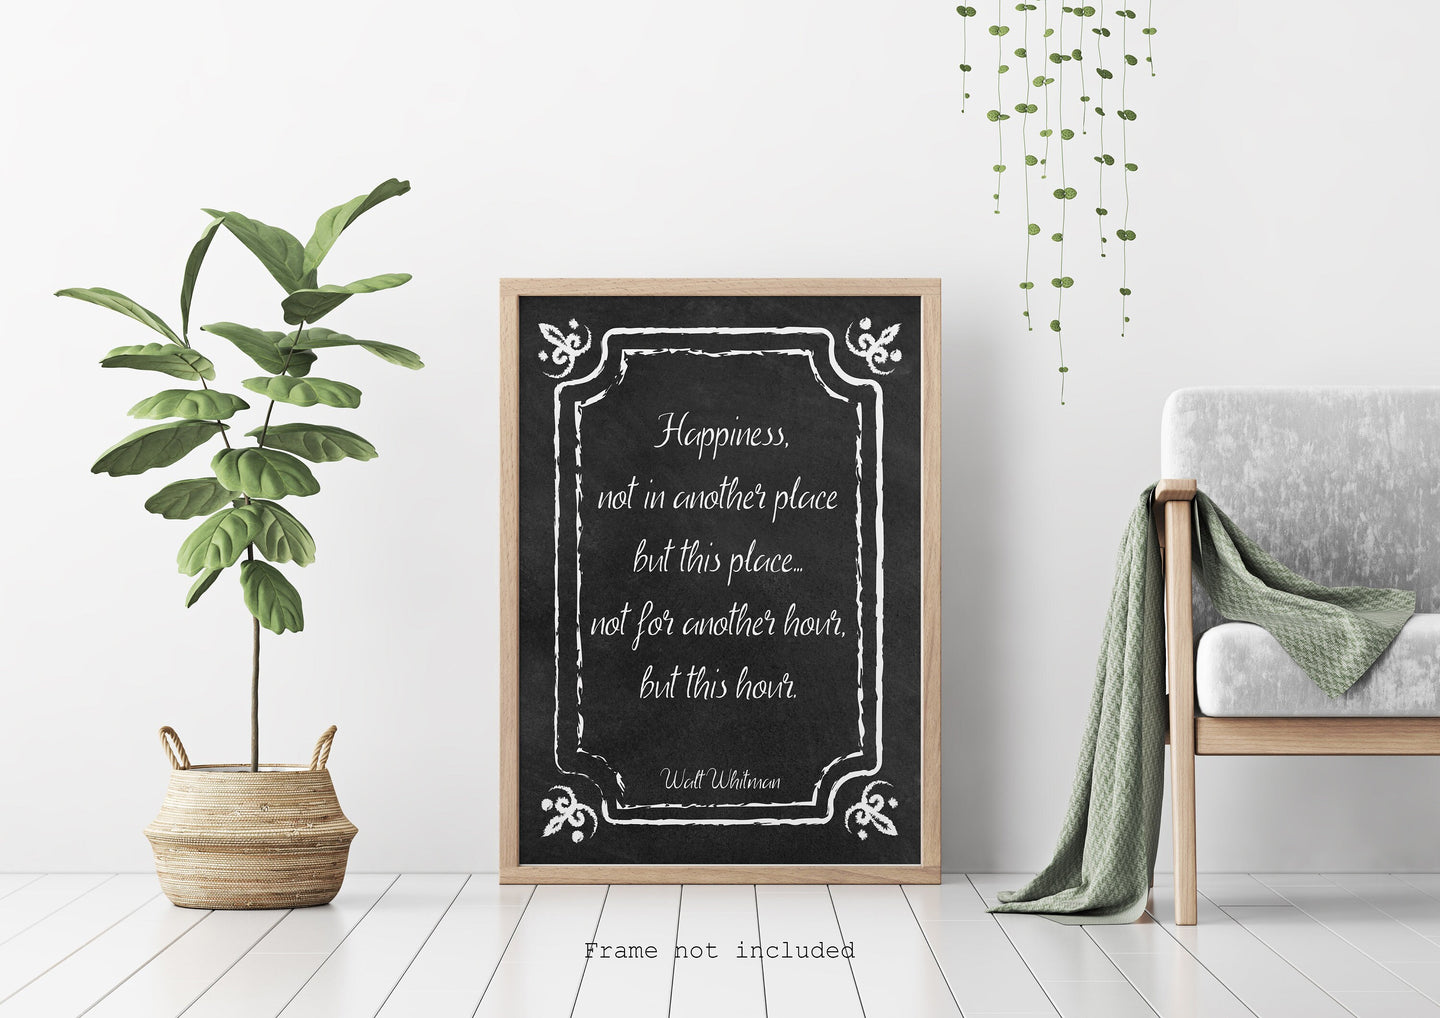 Walt Whitman Quote - Happiness, not in another place but this place - poetry print literary wall art print UNFRAMED - Chalkboard style